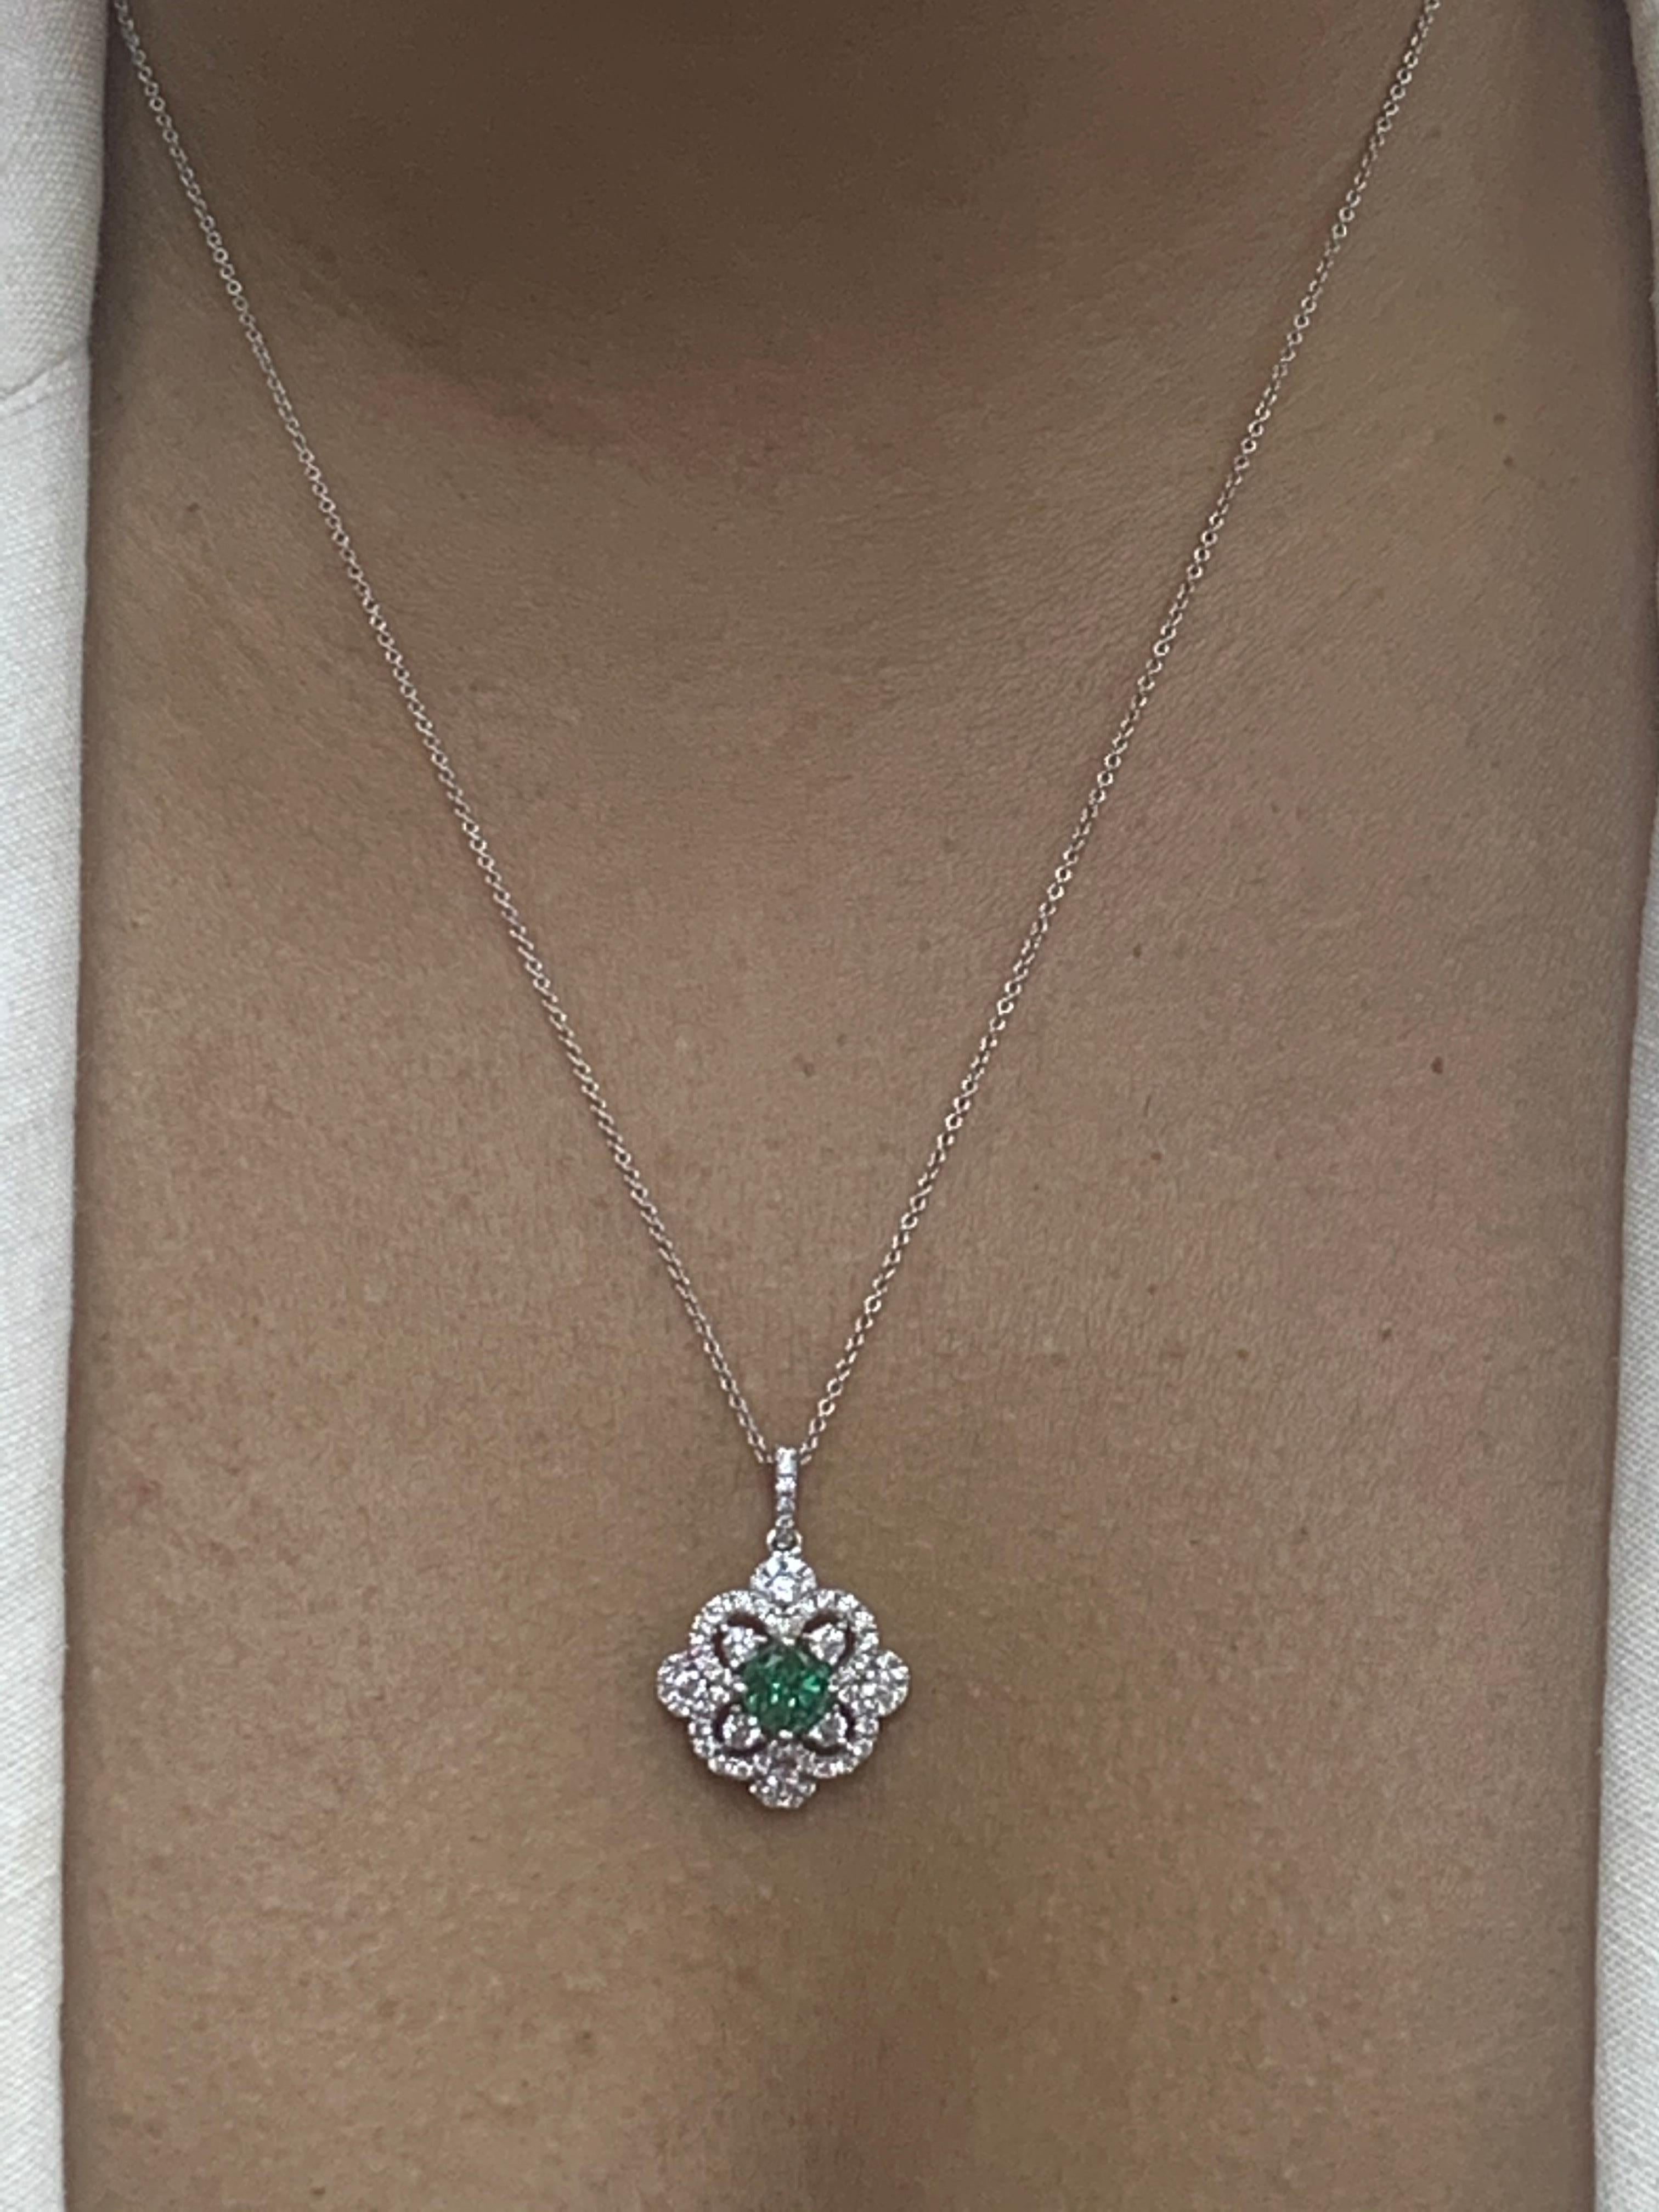 0.81 Carat Round Cut Emerald and Diamond Pendant Necklace in 18K For Sale 3